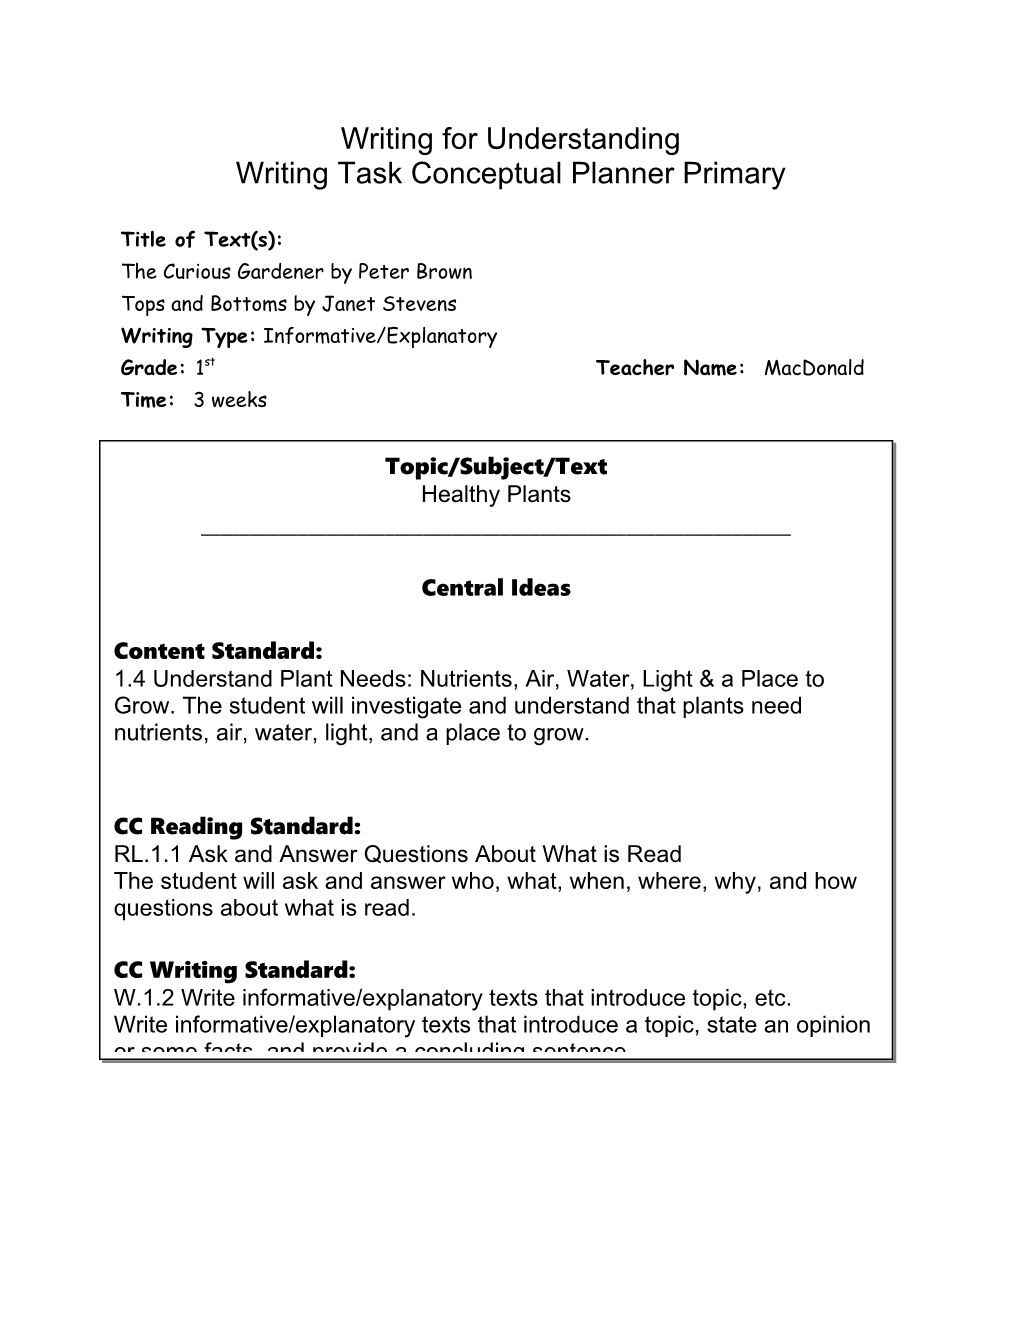 Writing Task Conceptual Planner Primary